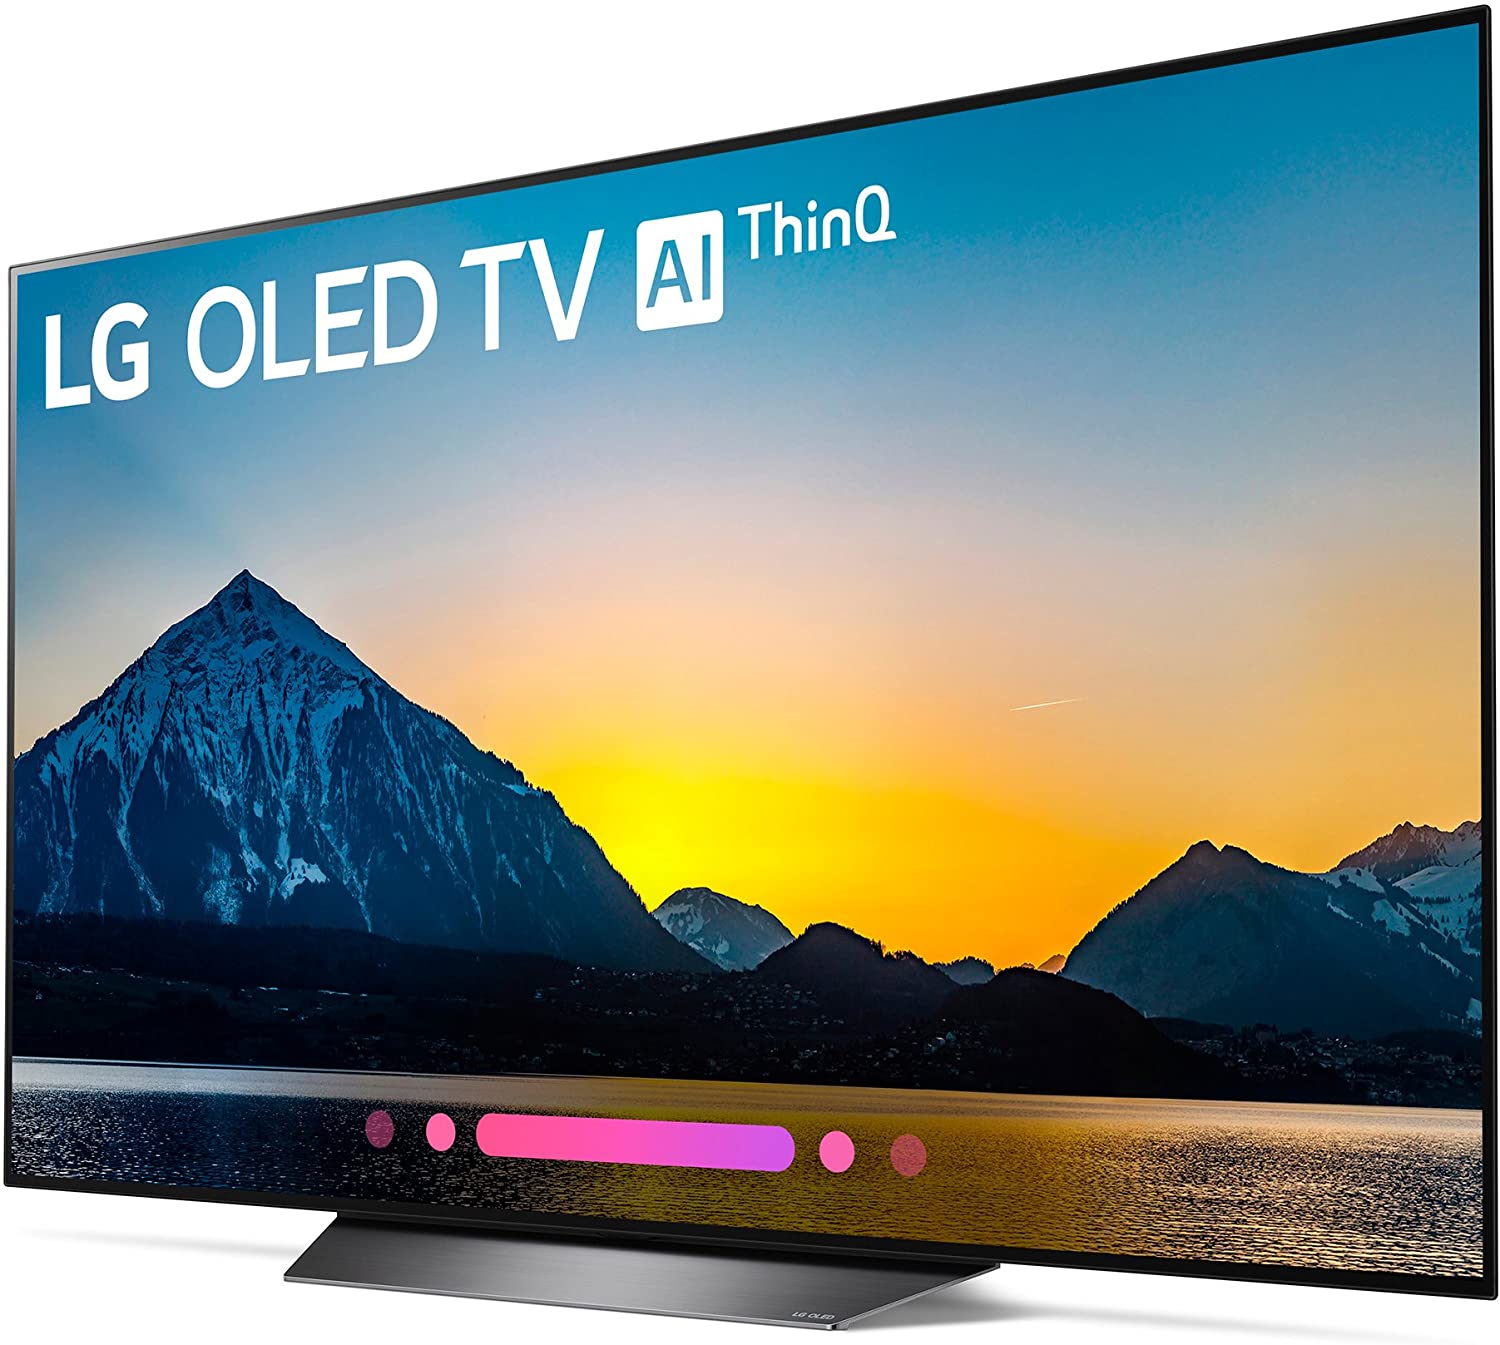 LG 2018 OLED Smart TVs are now compatible with Apple AirPlay